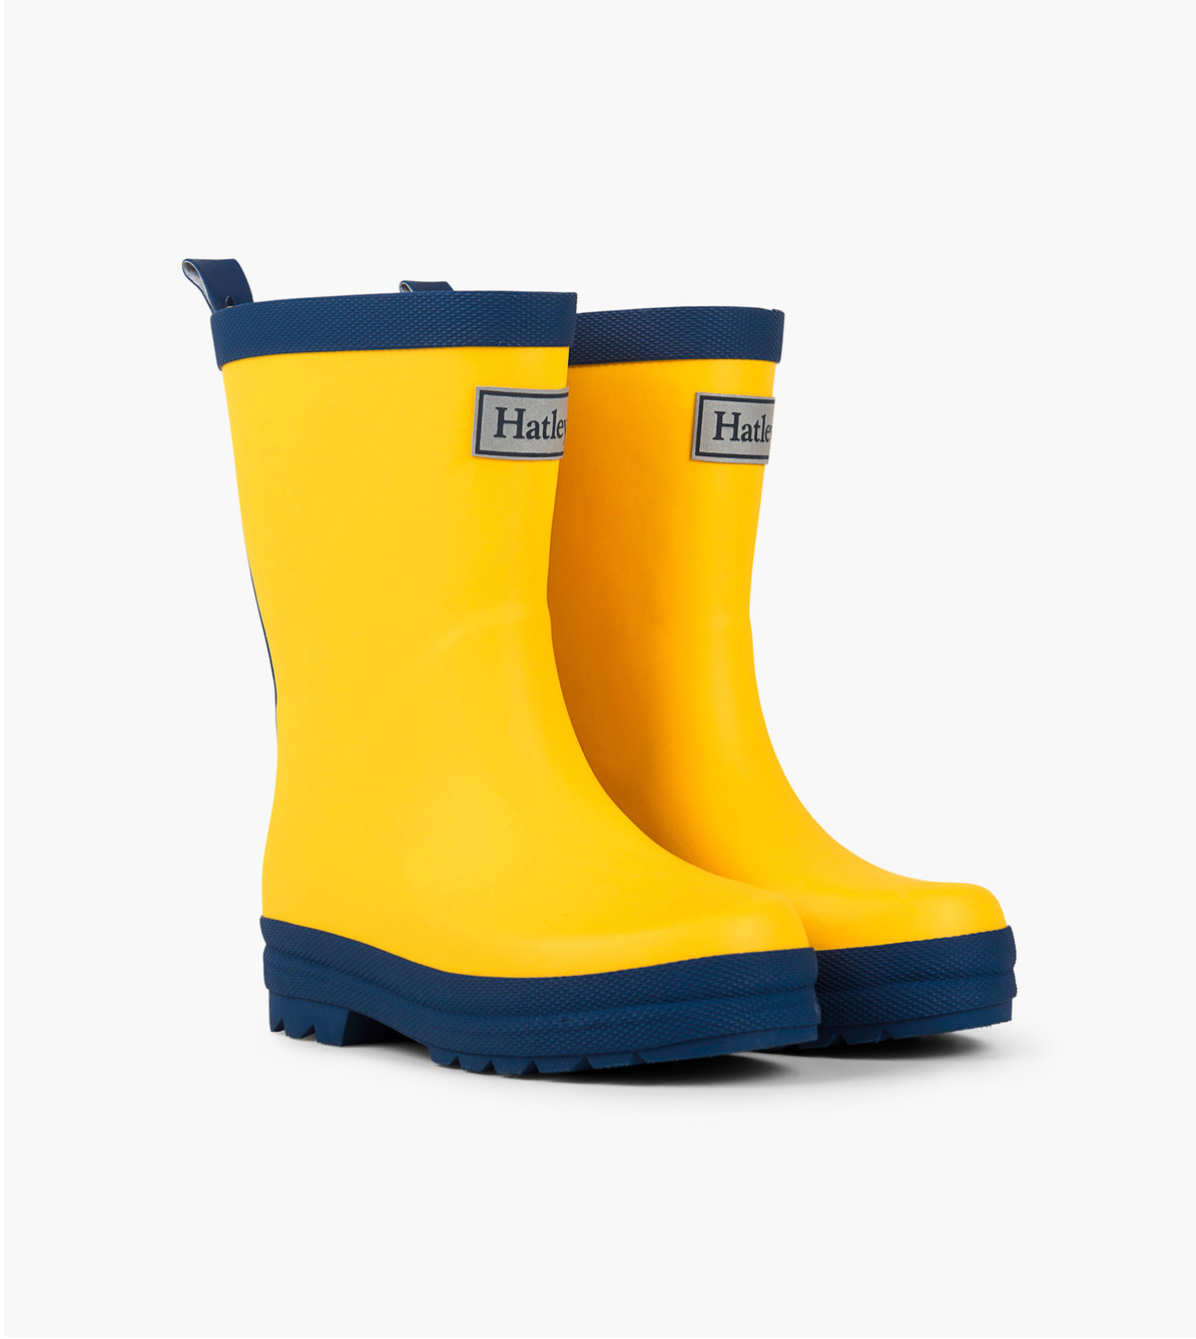 Yellow & Navy Matte Wellies perfect for rainy days & puddle jumping!